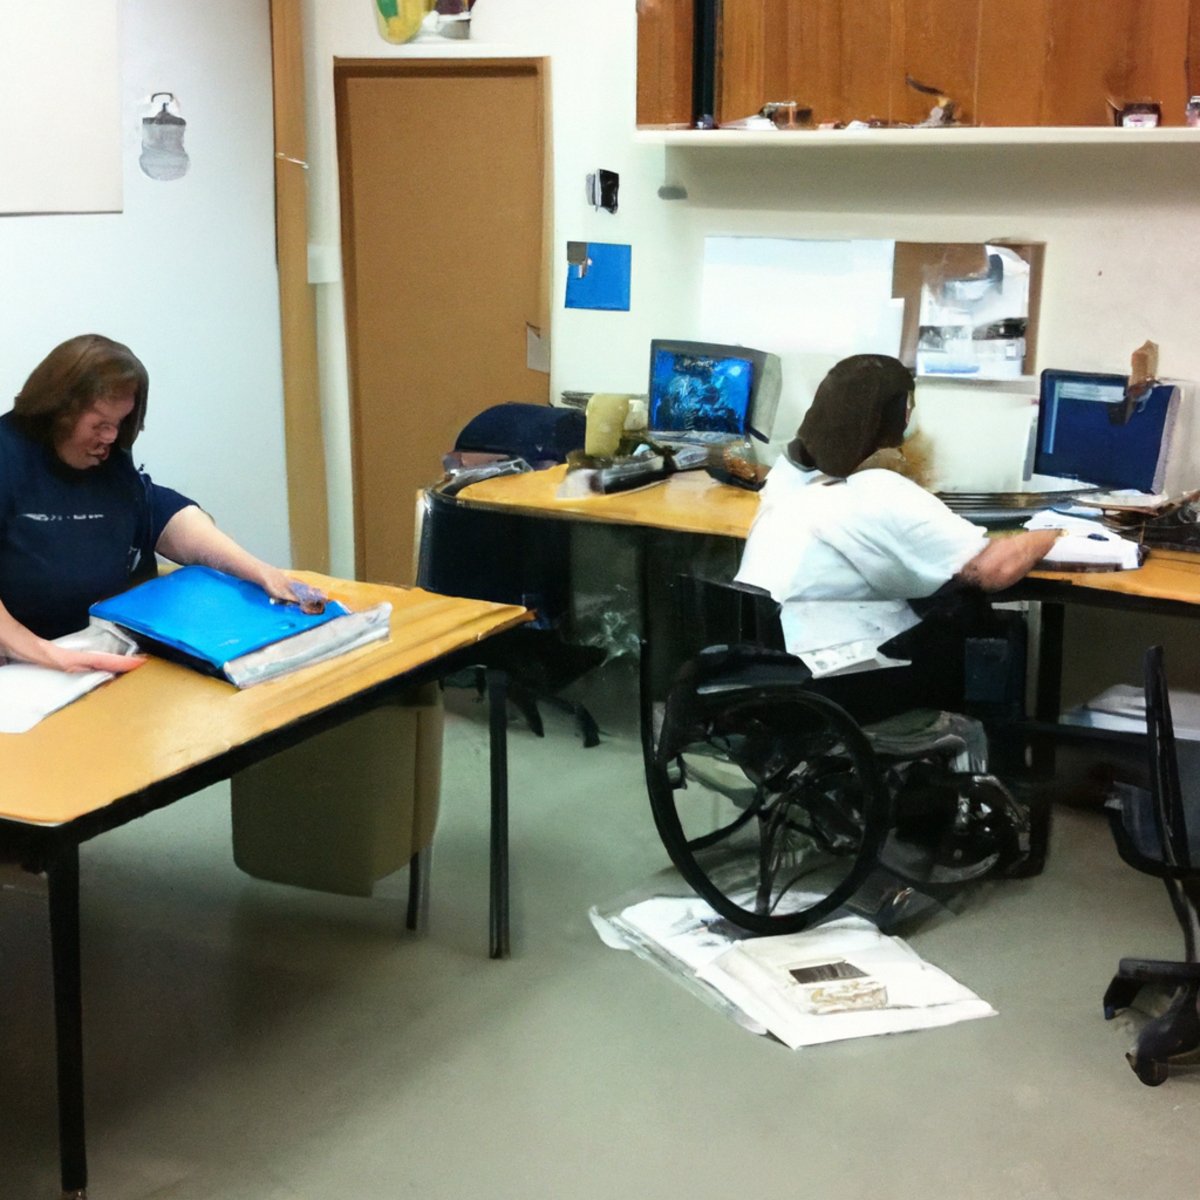 Inclusive classroom with visually impaired student using assistive technology for productive learning.